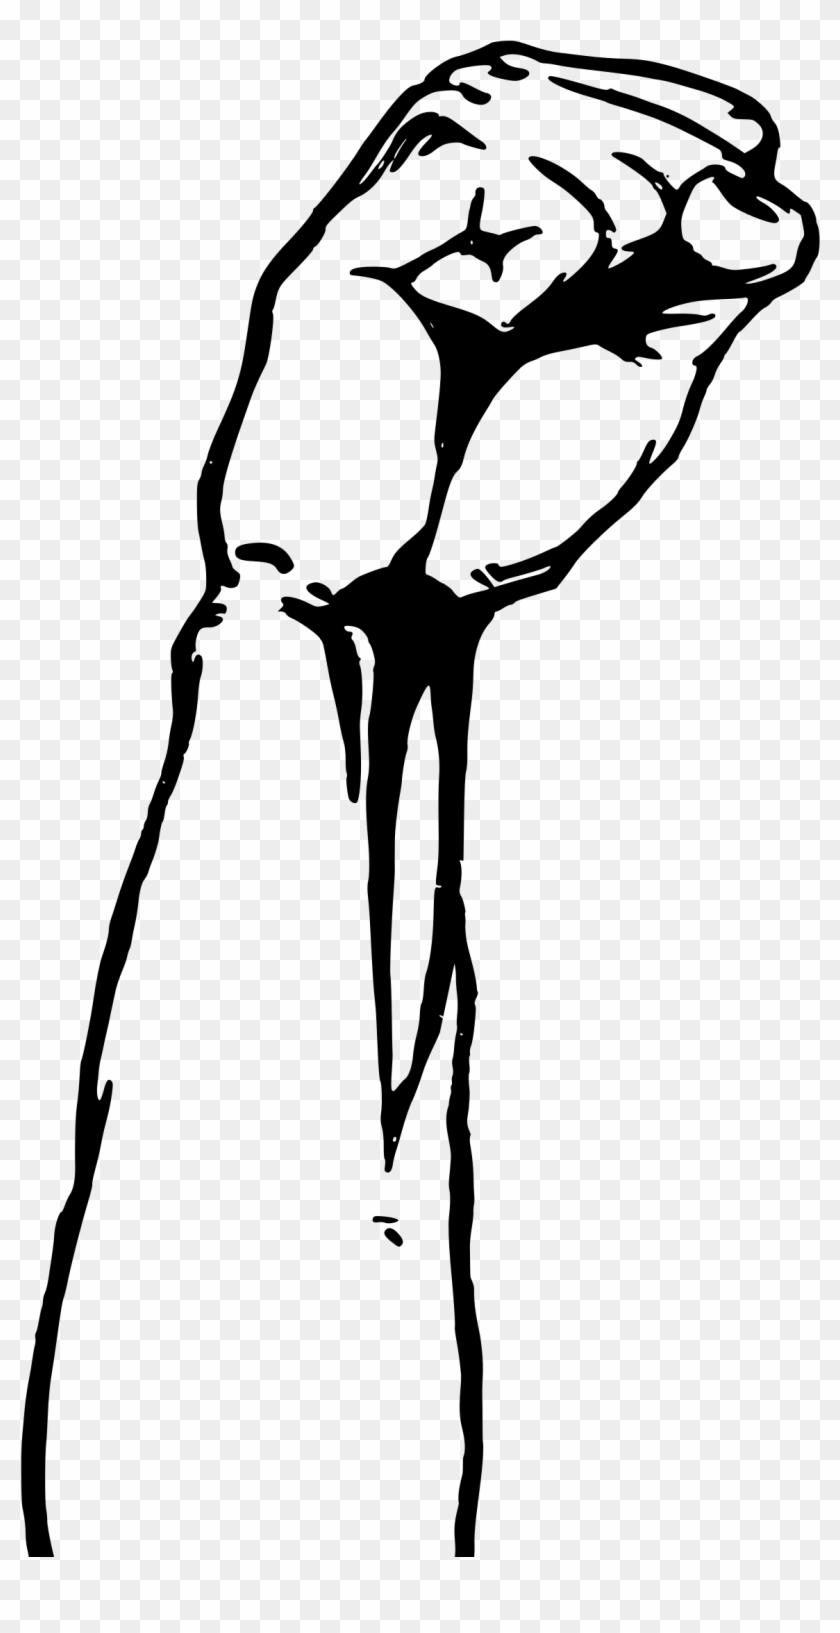 Clipart Fist Big - Muscle Arm Drawing #1681701